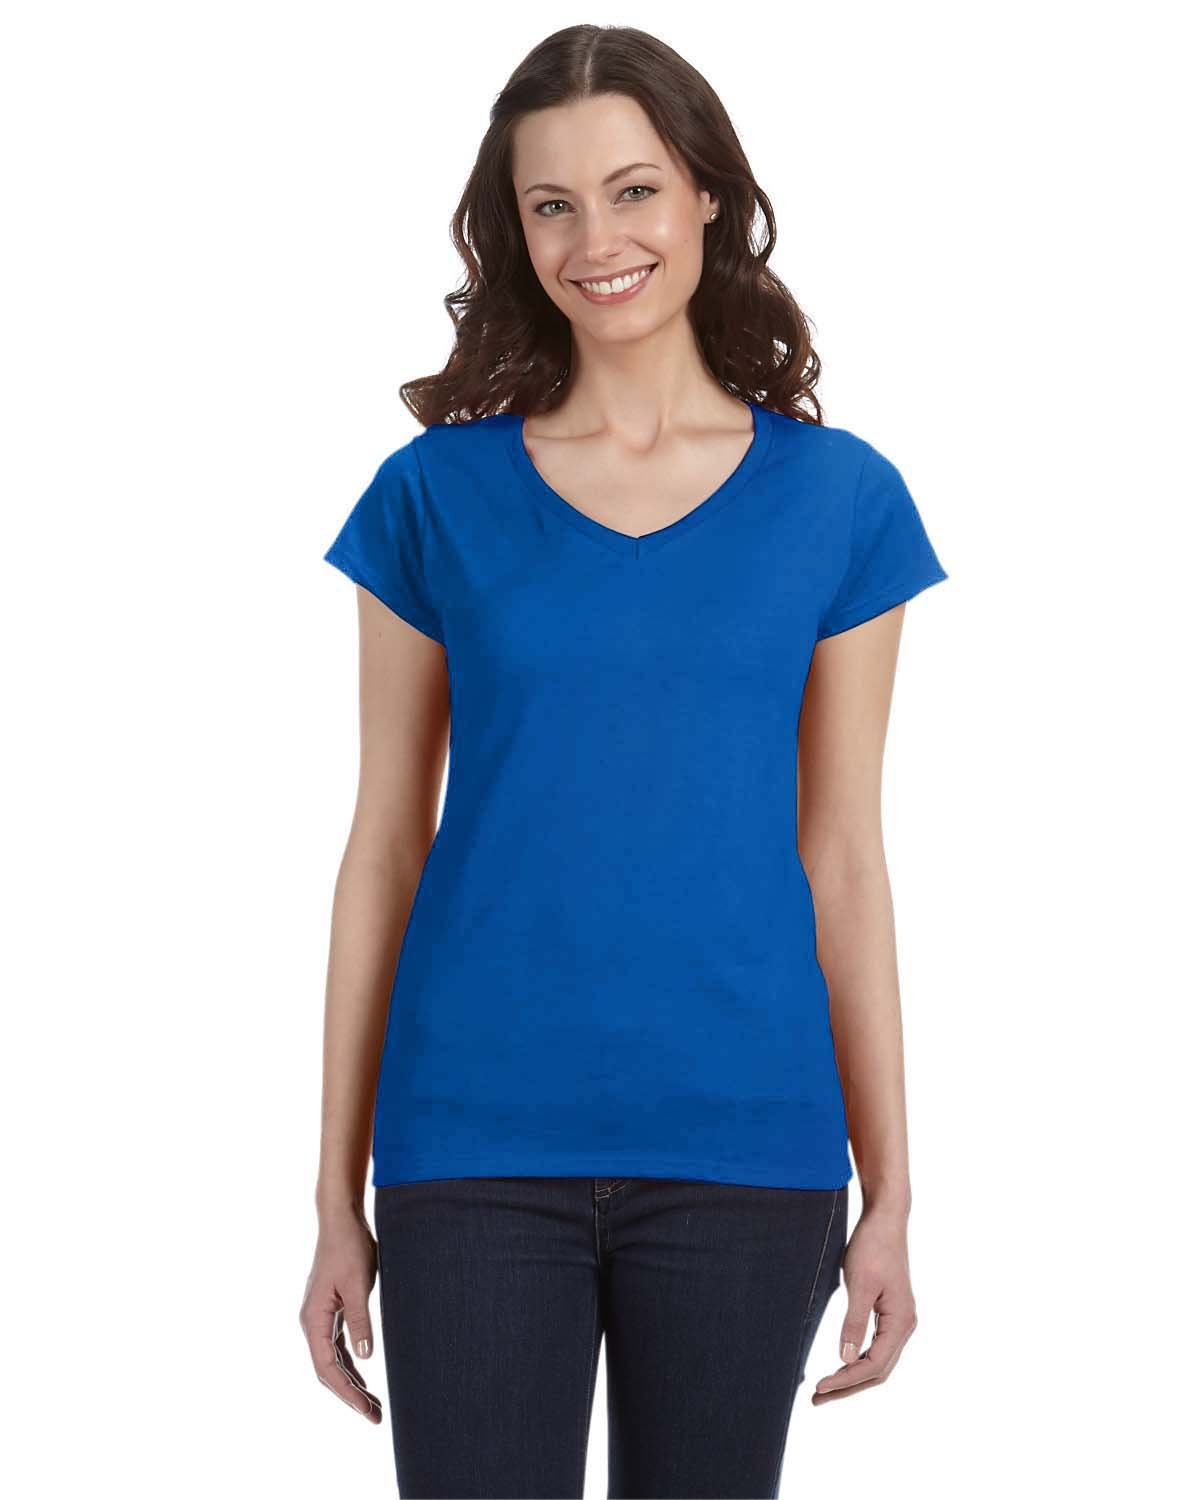 Gildan Ladies' SoftStyle®  Fitted V-Neck T-Shirt ROYAL BLUE 